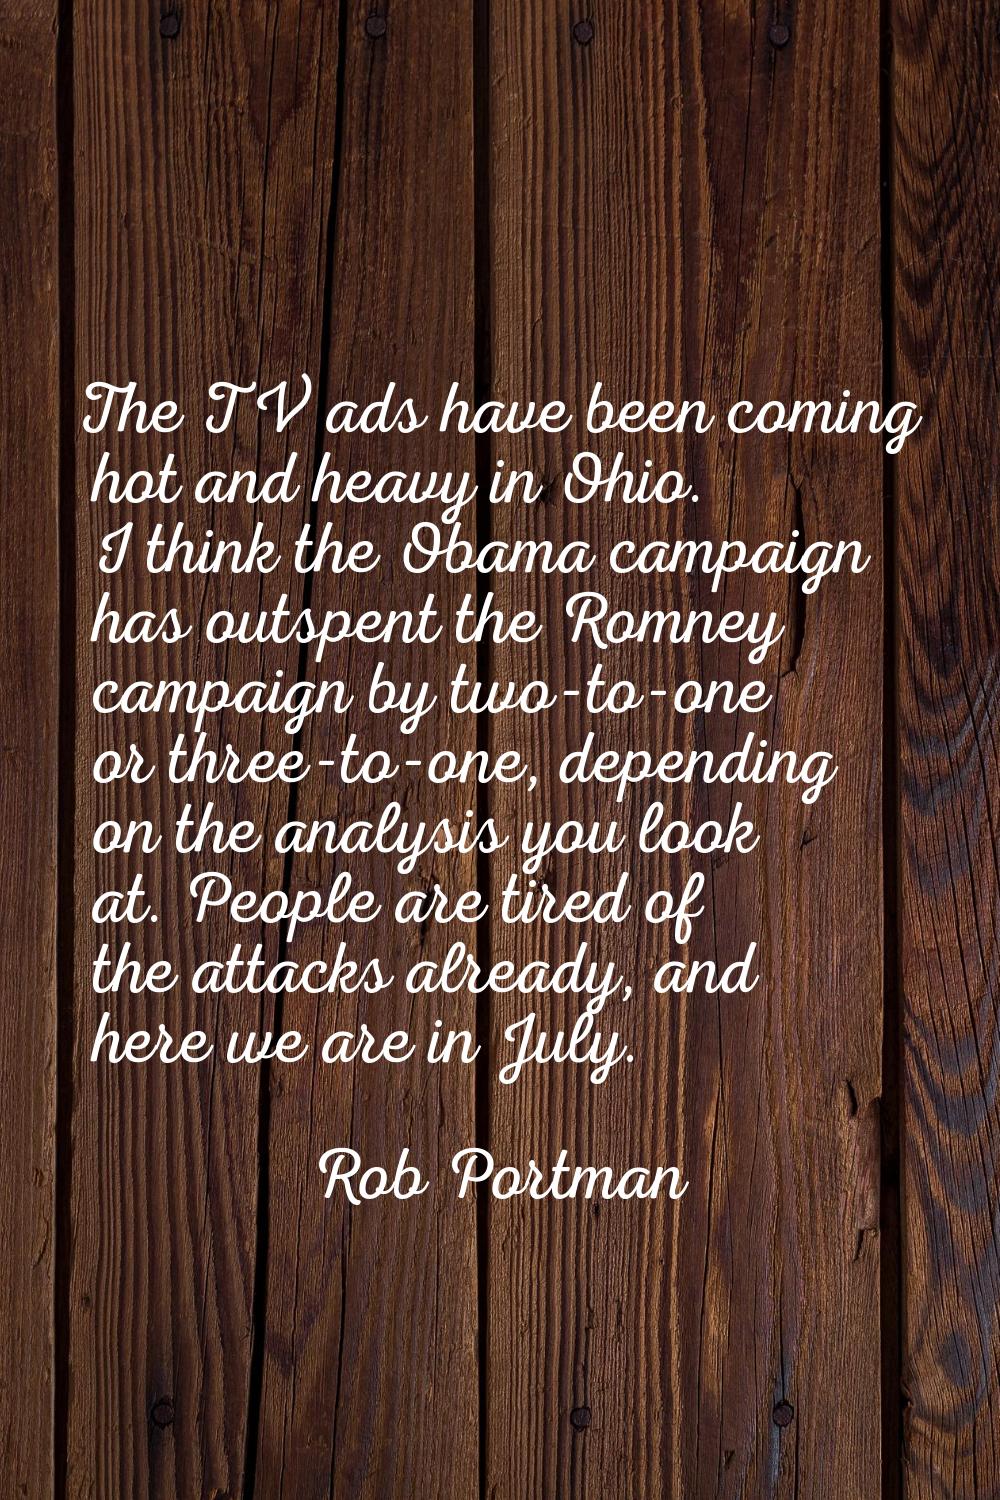 The TV ads have been coming hot and heavy in Ohio. I think the Obama campaign has outspent the Romn